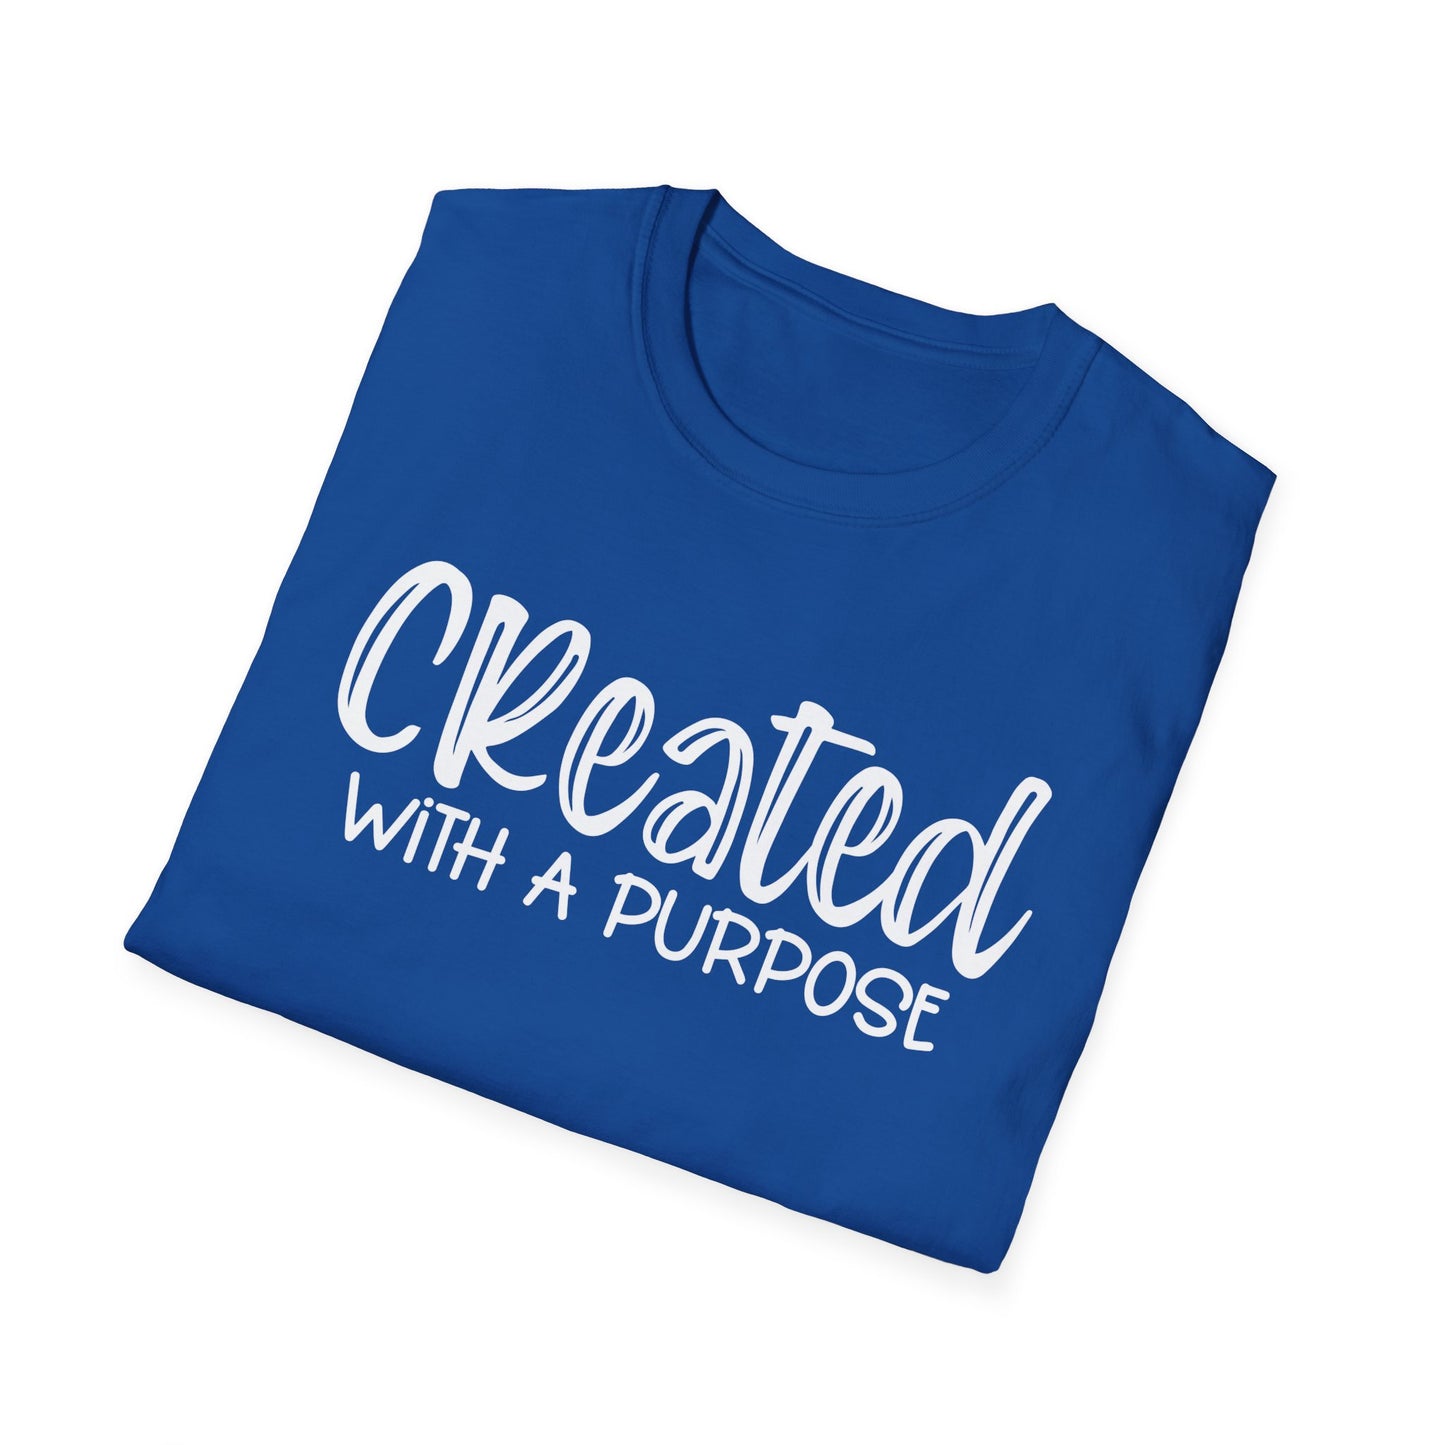 Created With A Purpose Unisex Softstyle T-Shirt